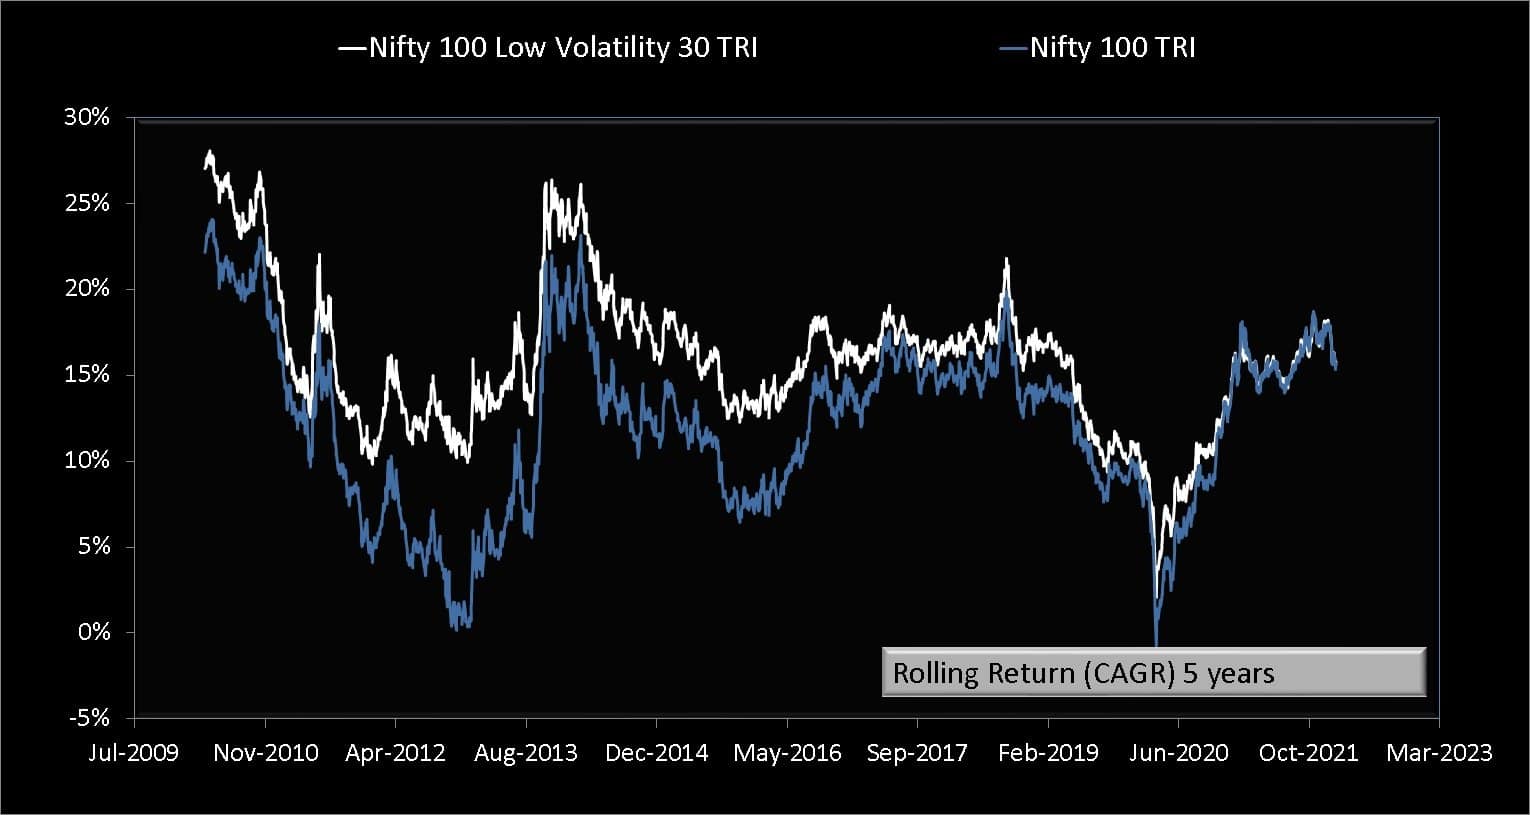 Five year rolling returns of Nifty 100 Low Volatility 30 TRI vs Nifty 100 TRI